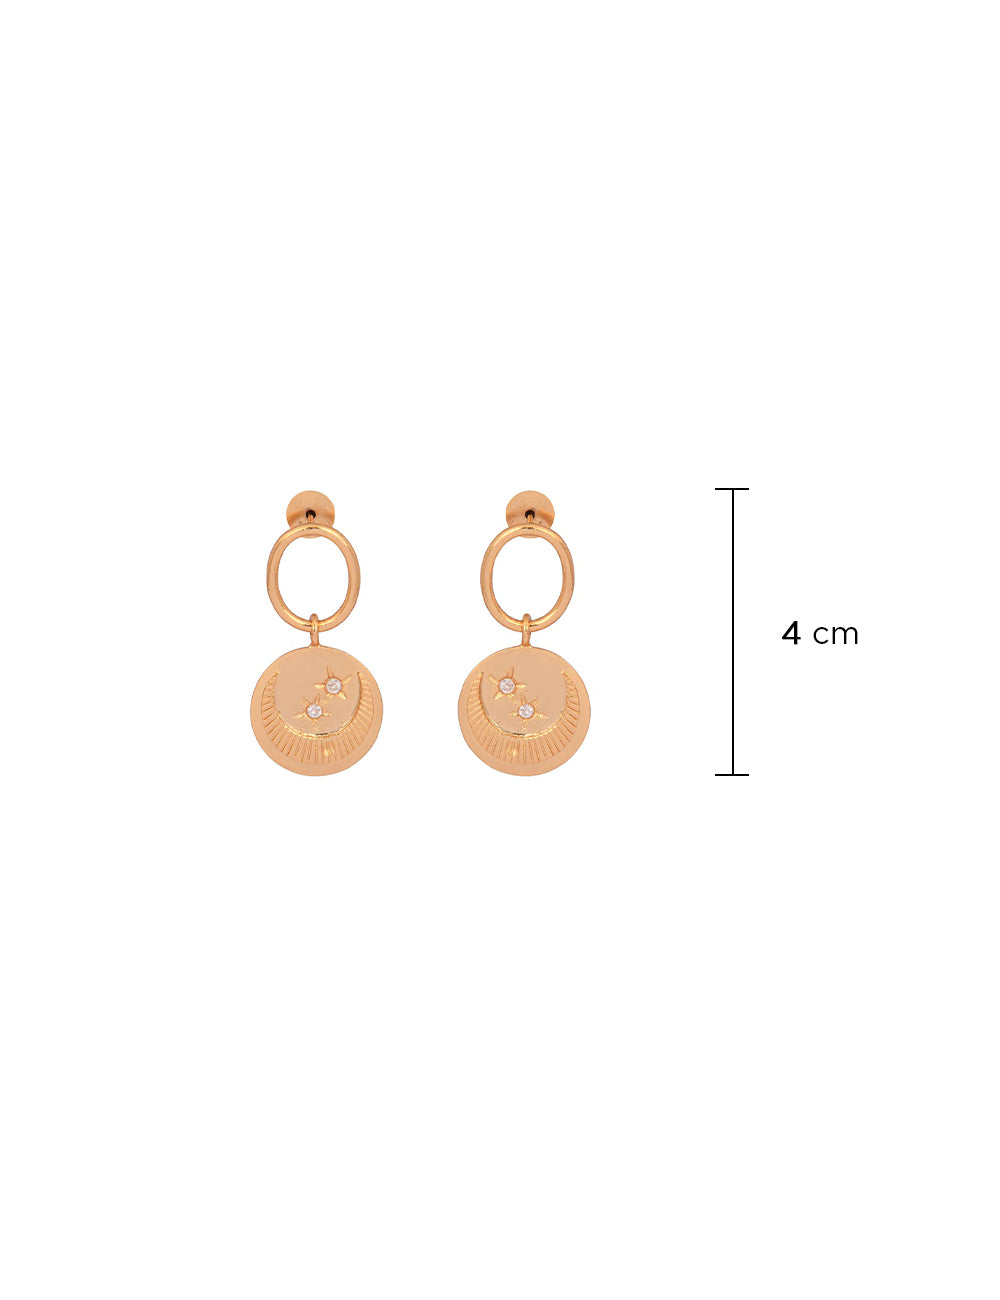 Chaand Earrings | Handmade | 24K Gold Plated | Made in India